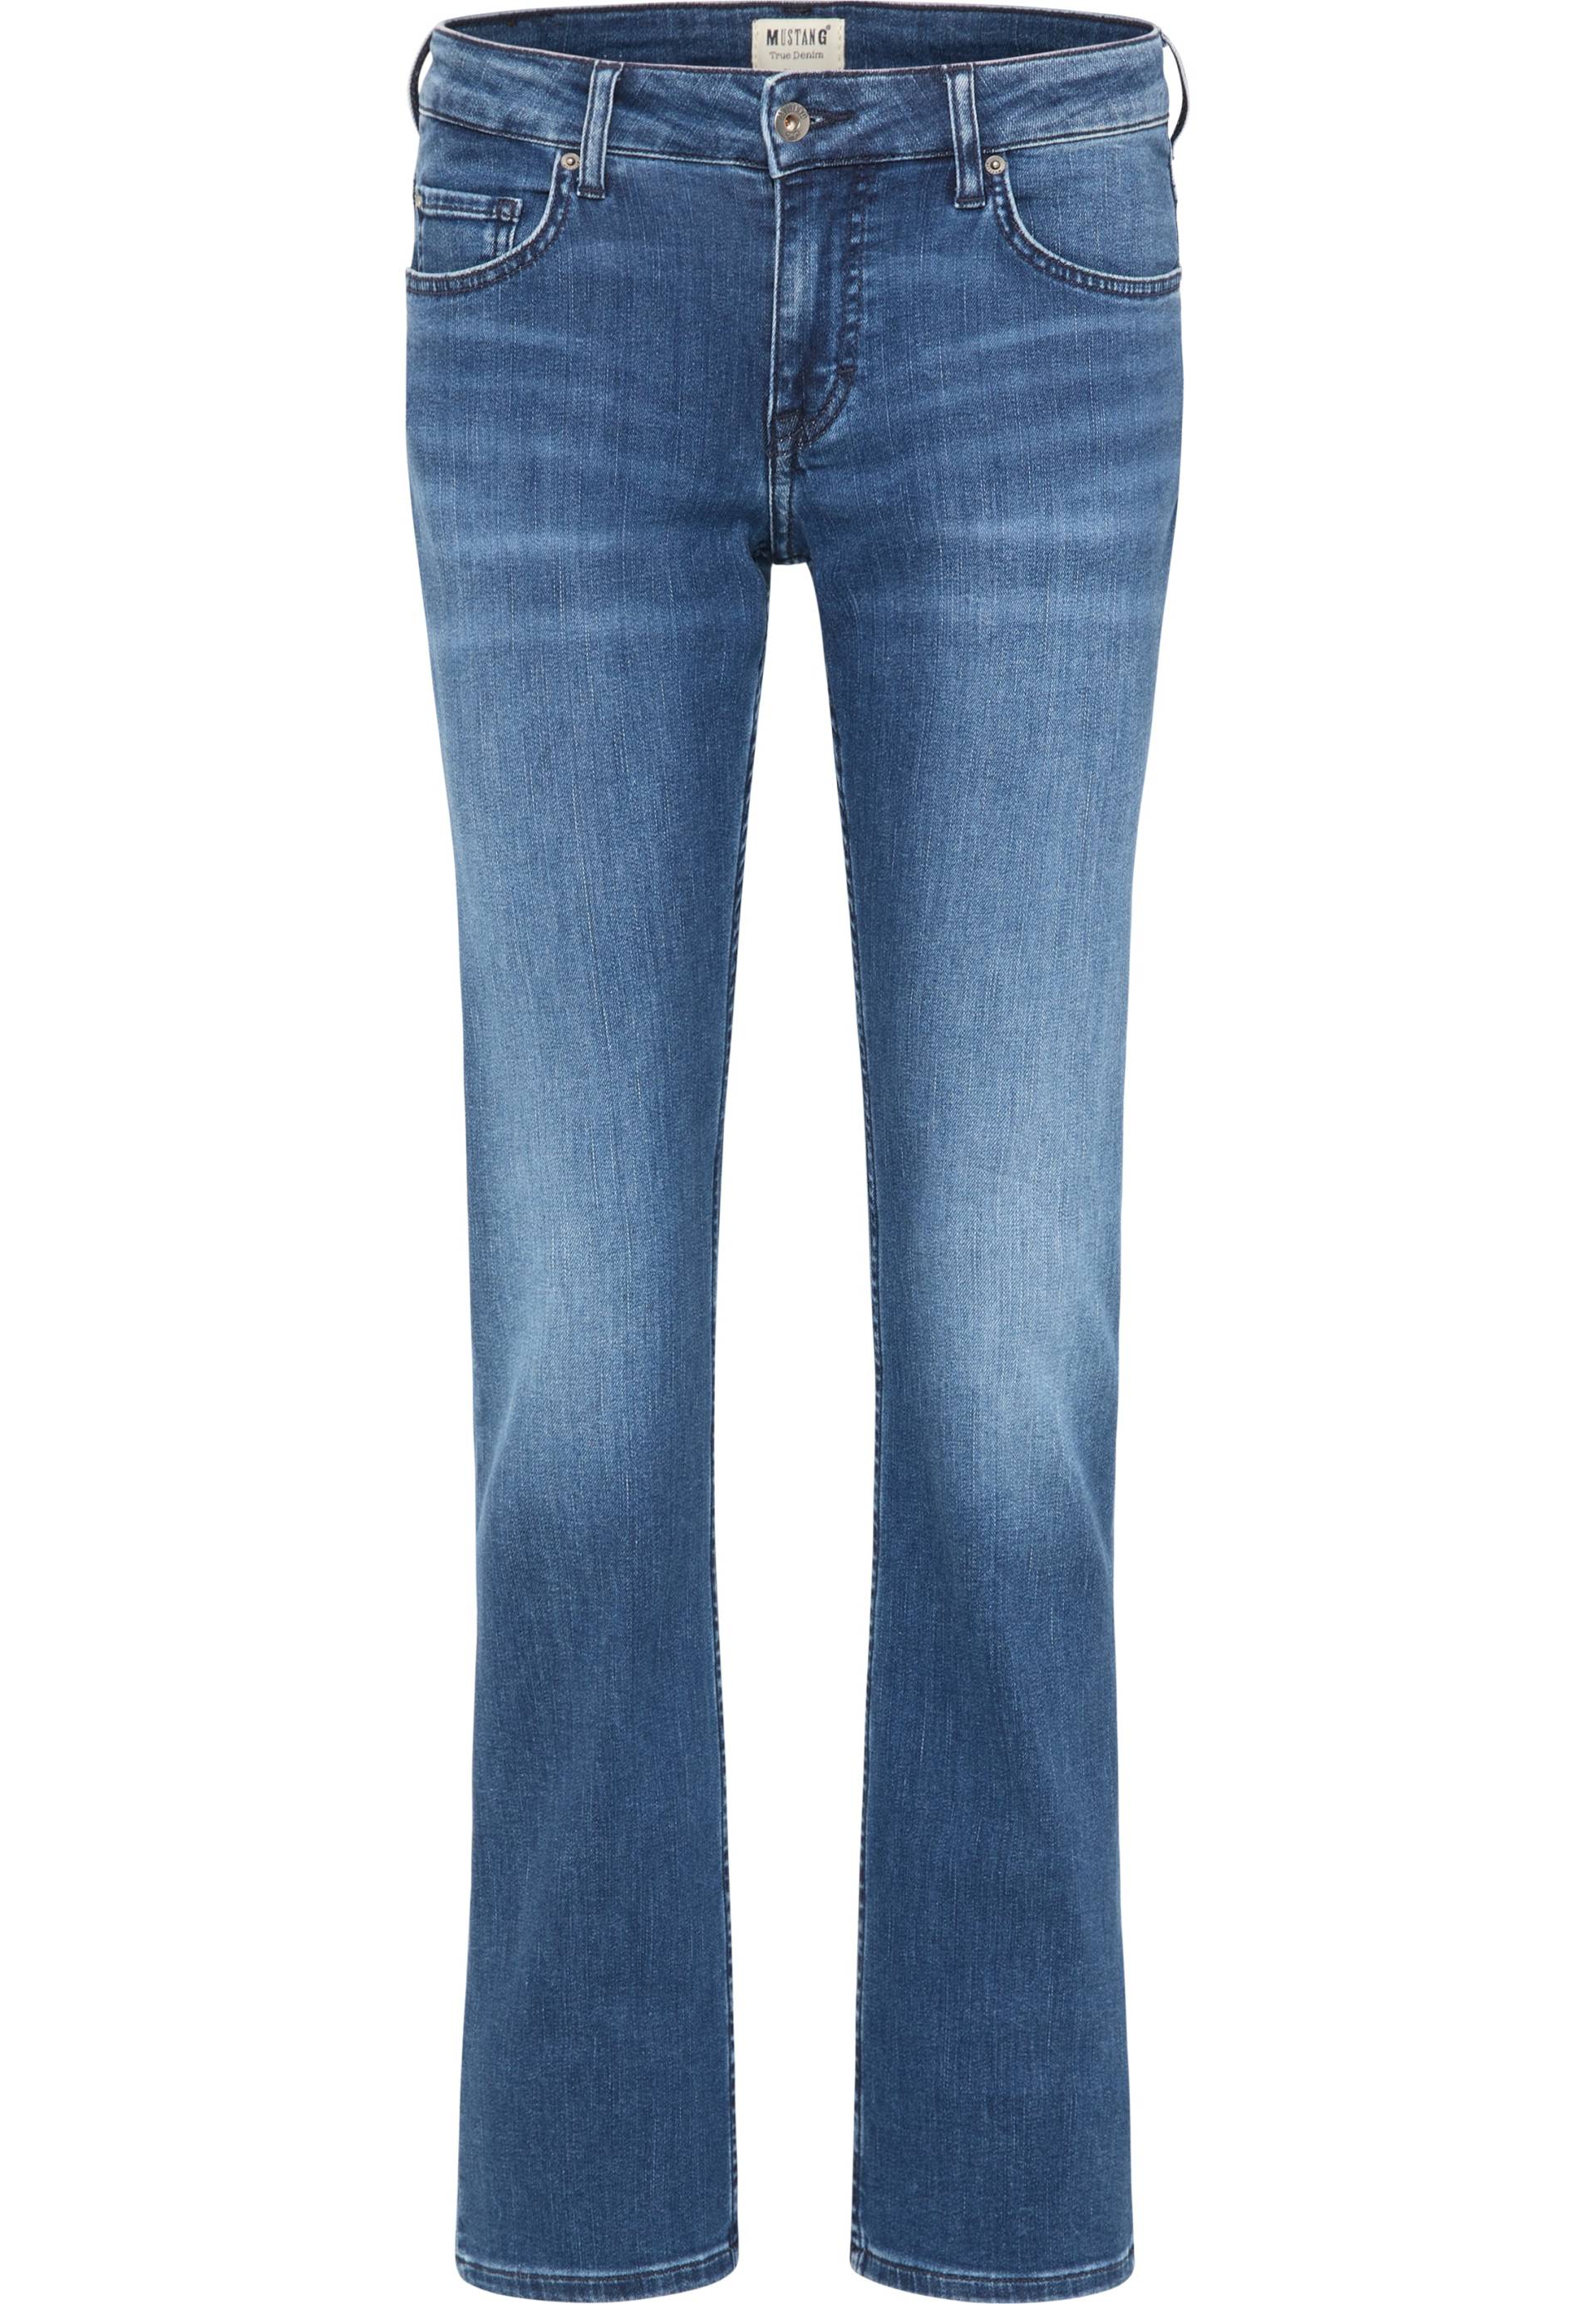 MUSTANG 5-Pocket-Jeans »Sissy Straight« von mustang